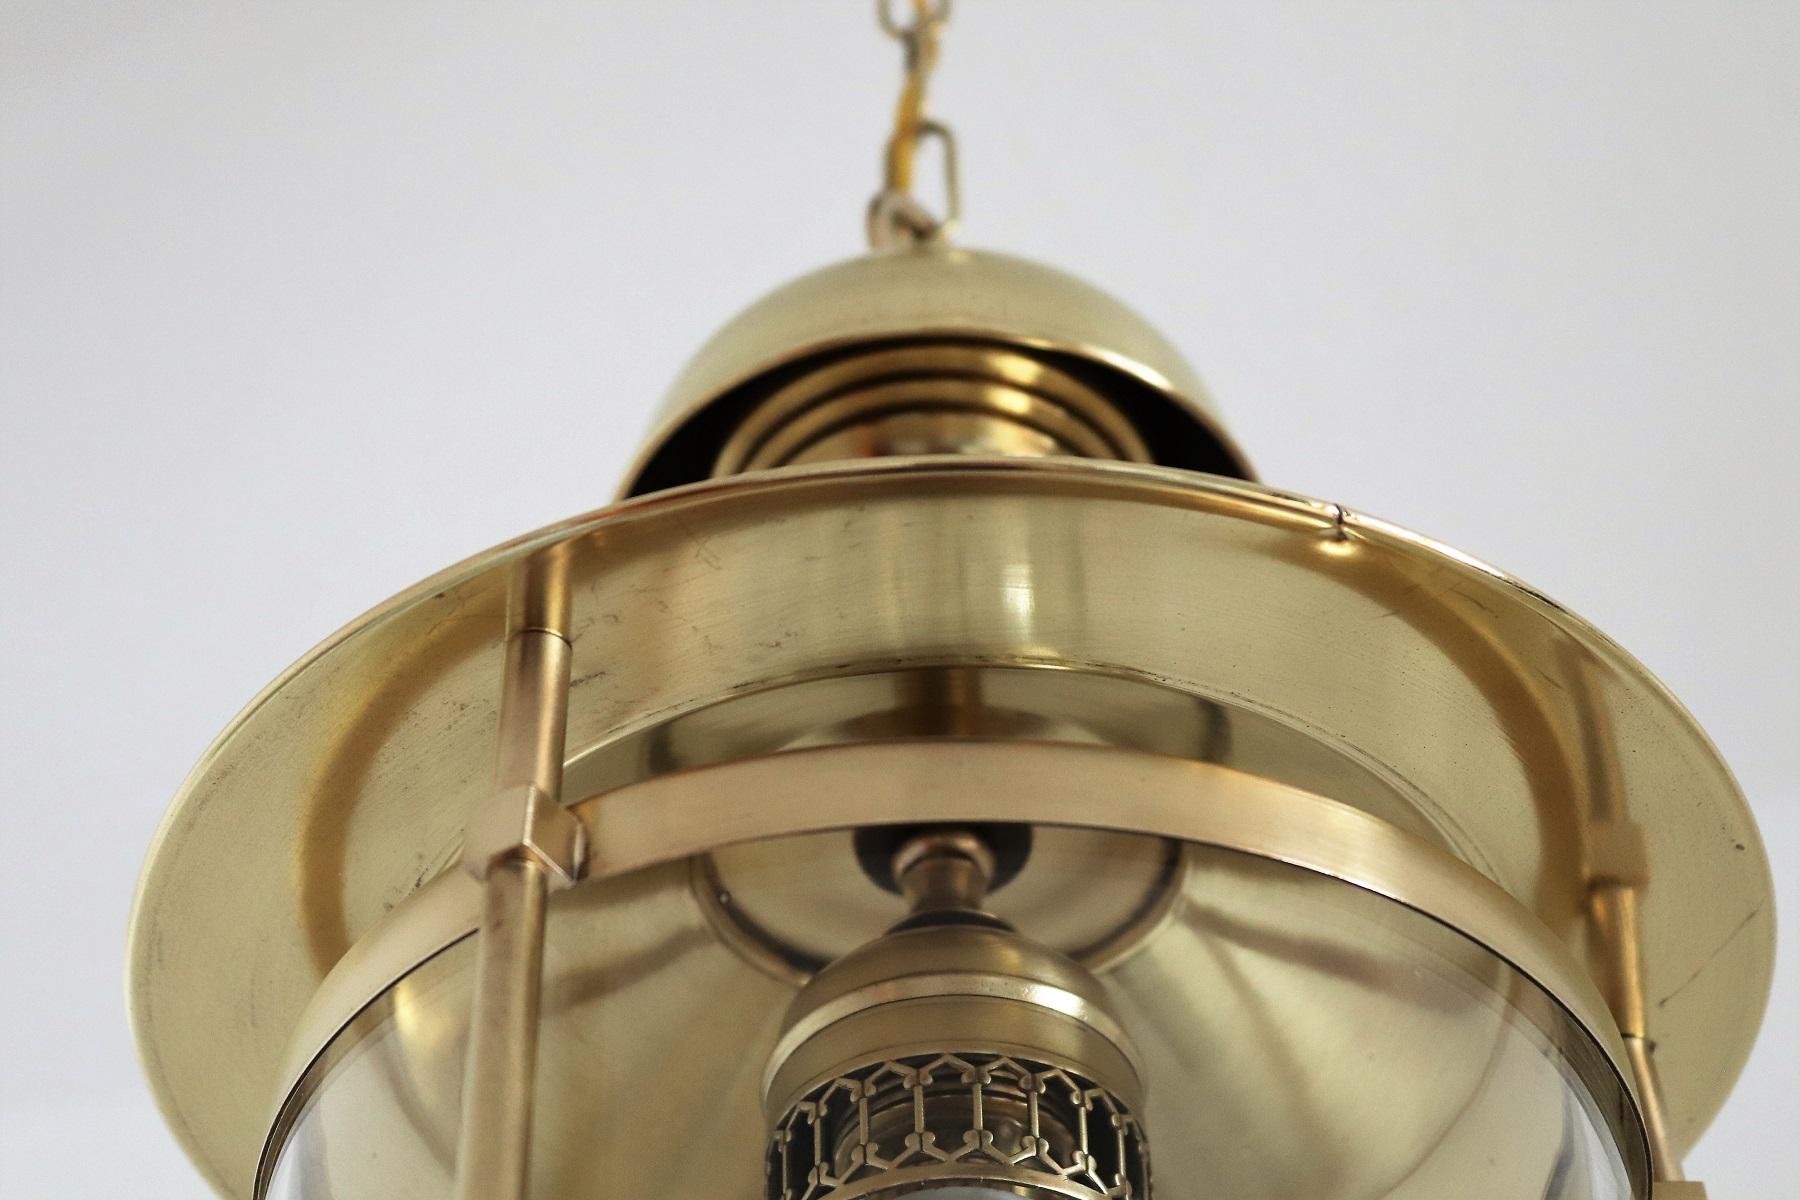 Italian Midcentury Brass and Glass Pendant Lamp or Lantern, 1970s For Sale 1